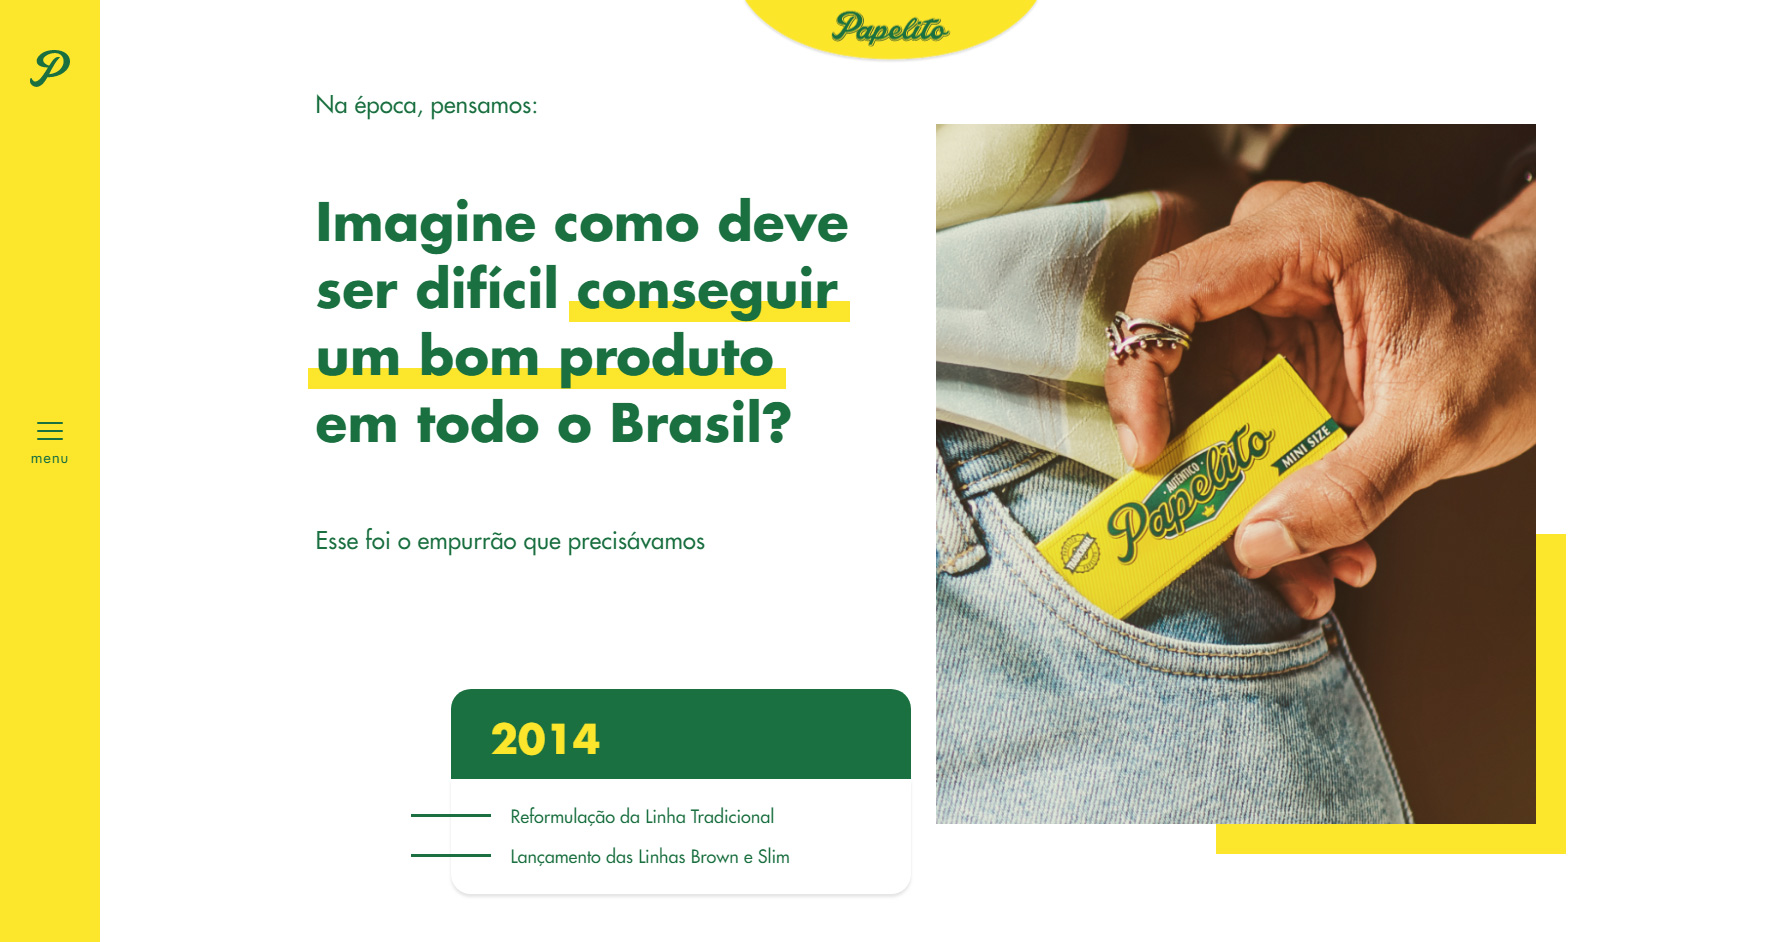 Papelito Brazil - Website of the Day